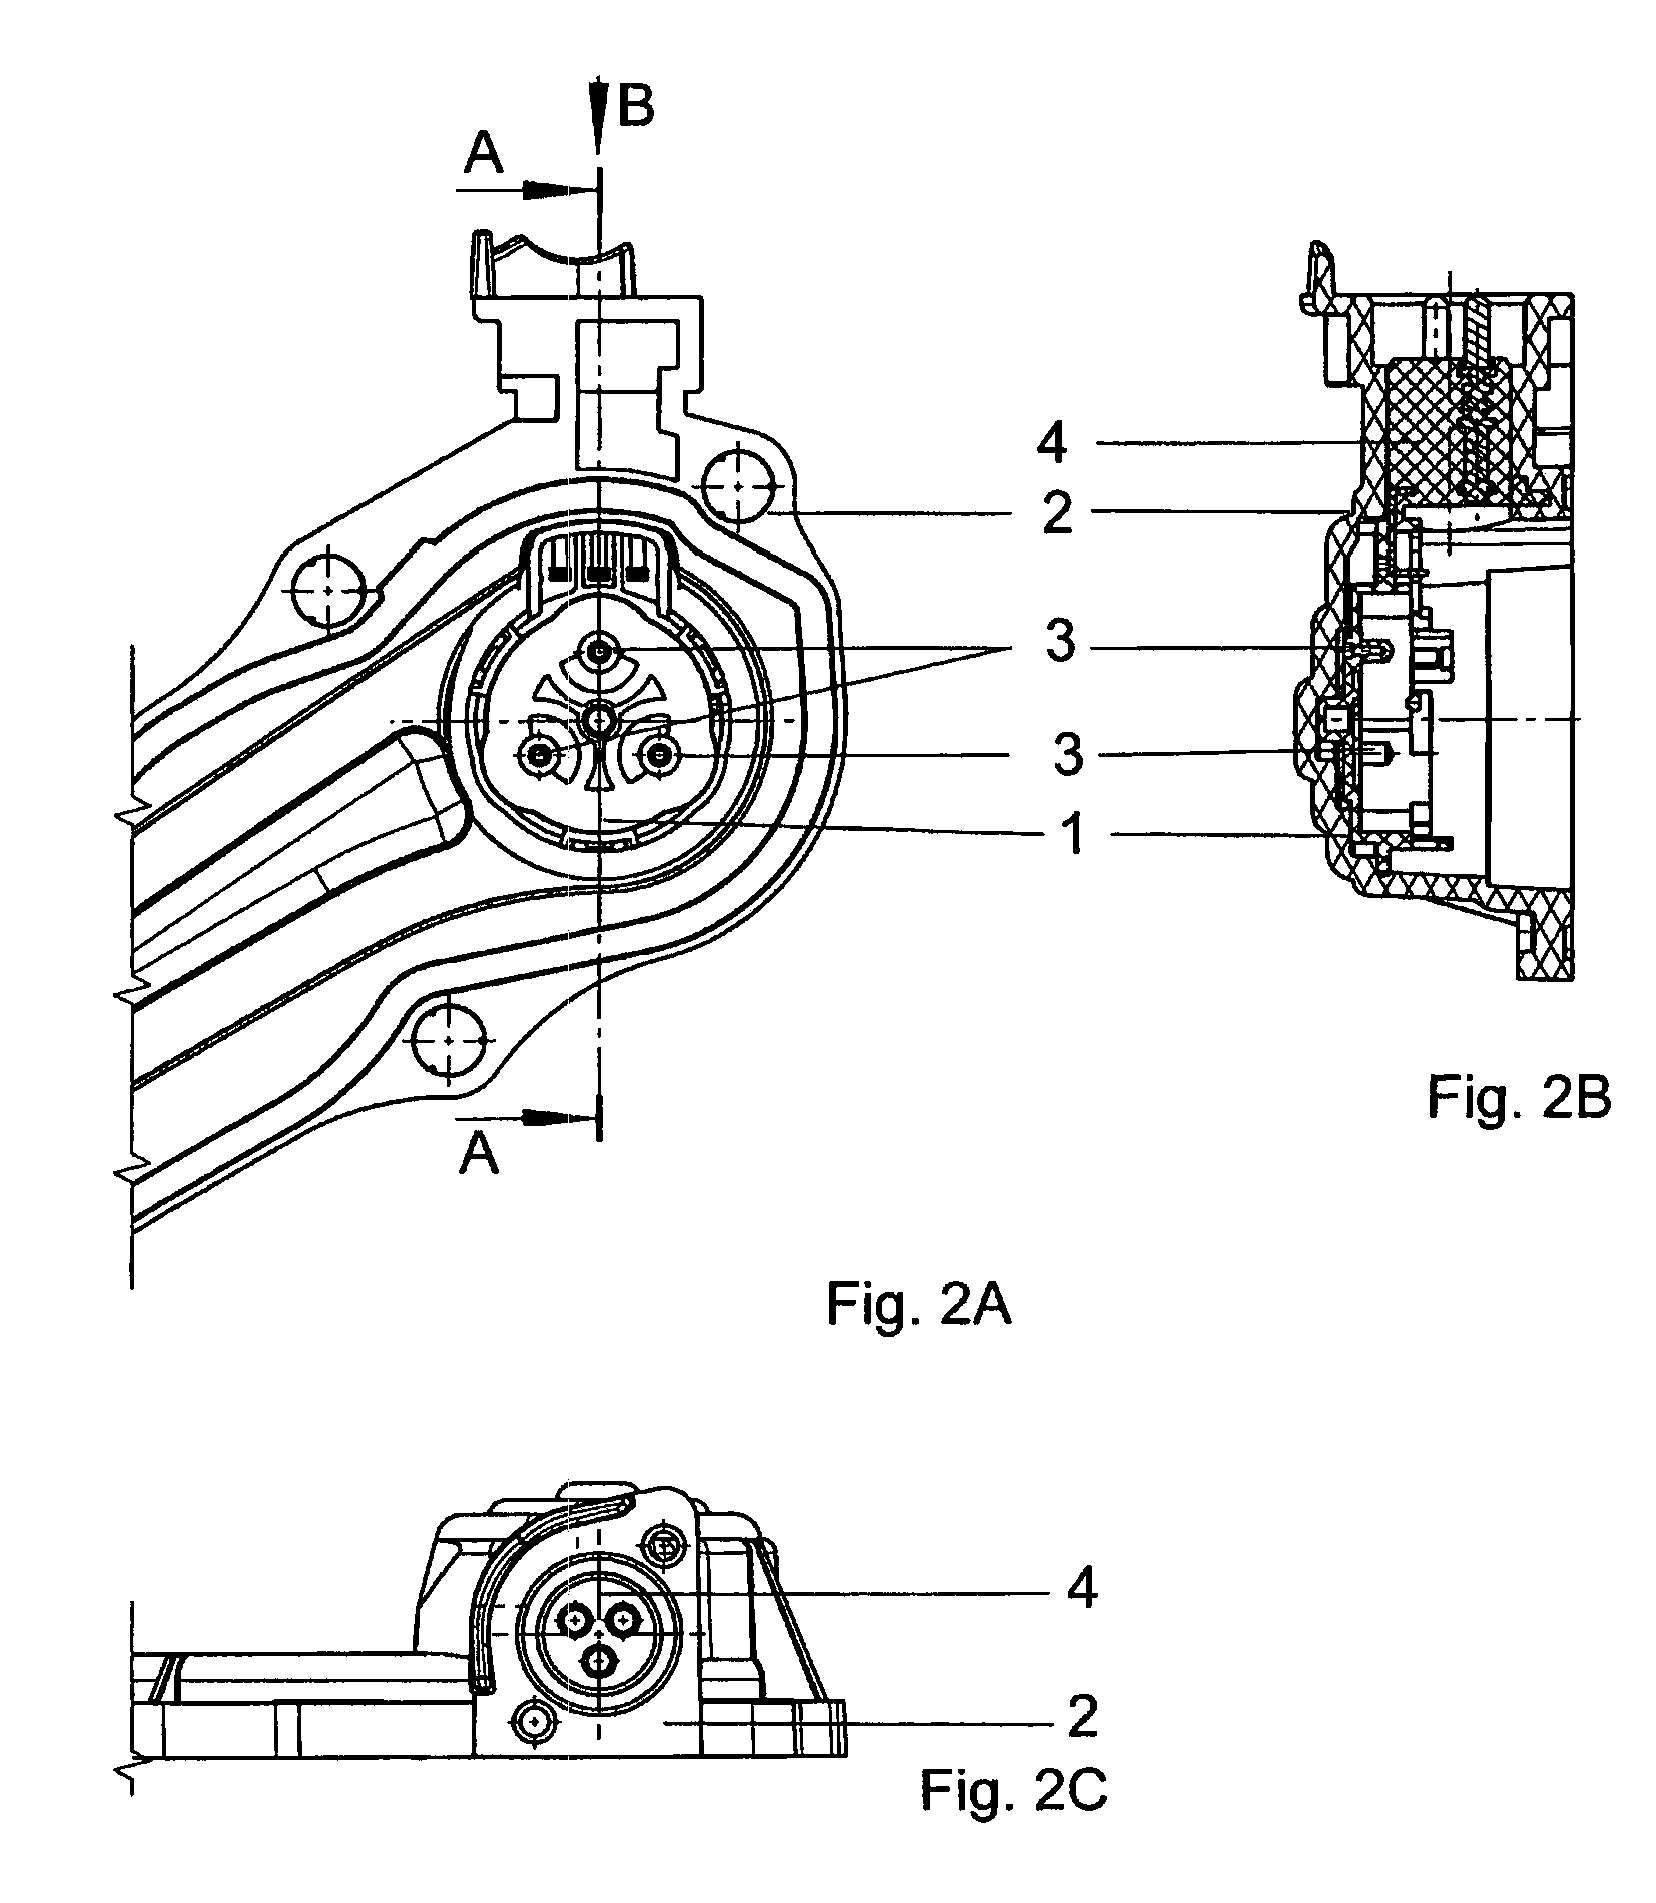 Method for producing a plastic housing comprising an incorporated guide and/or bearing for mechanical components